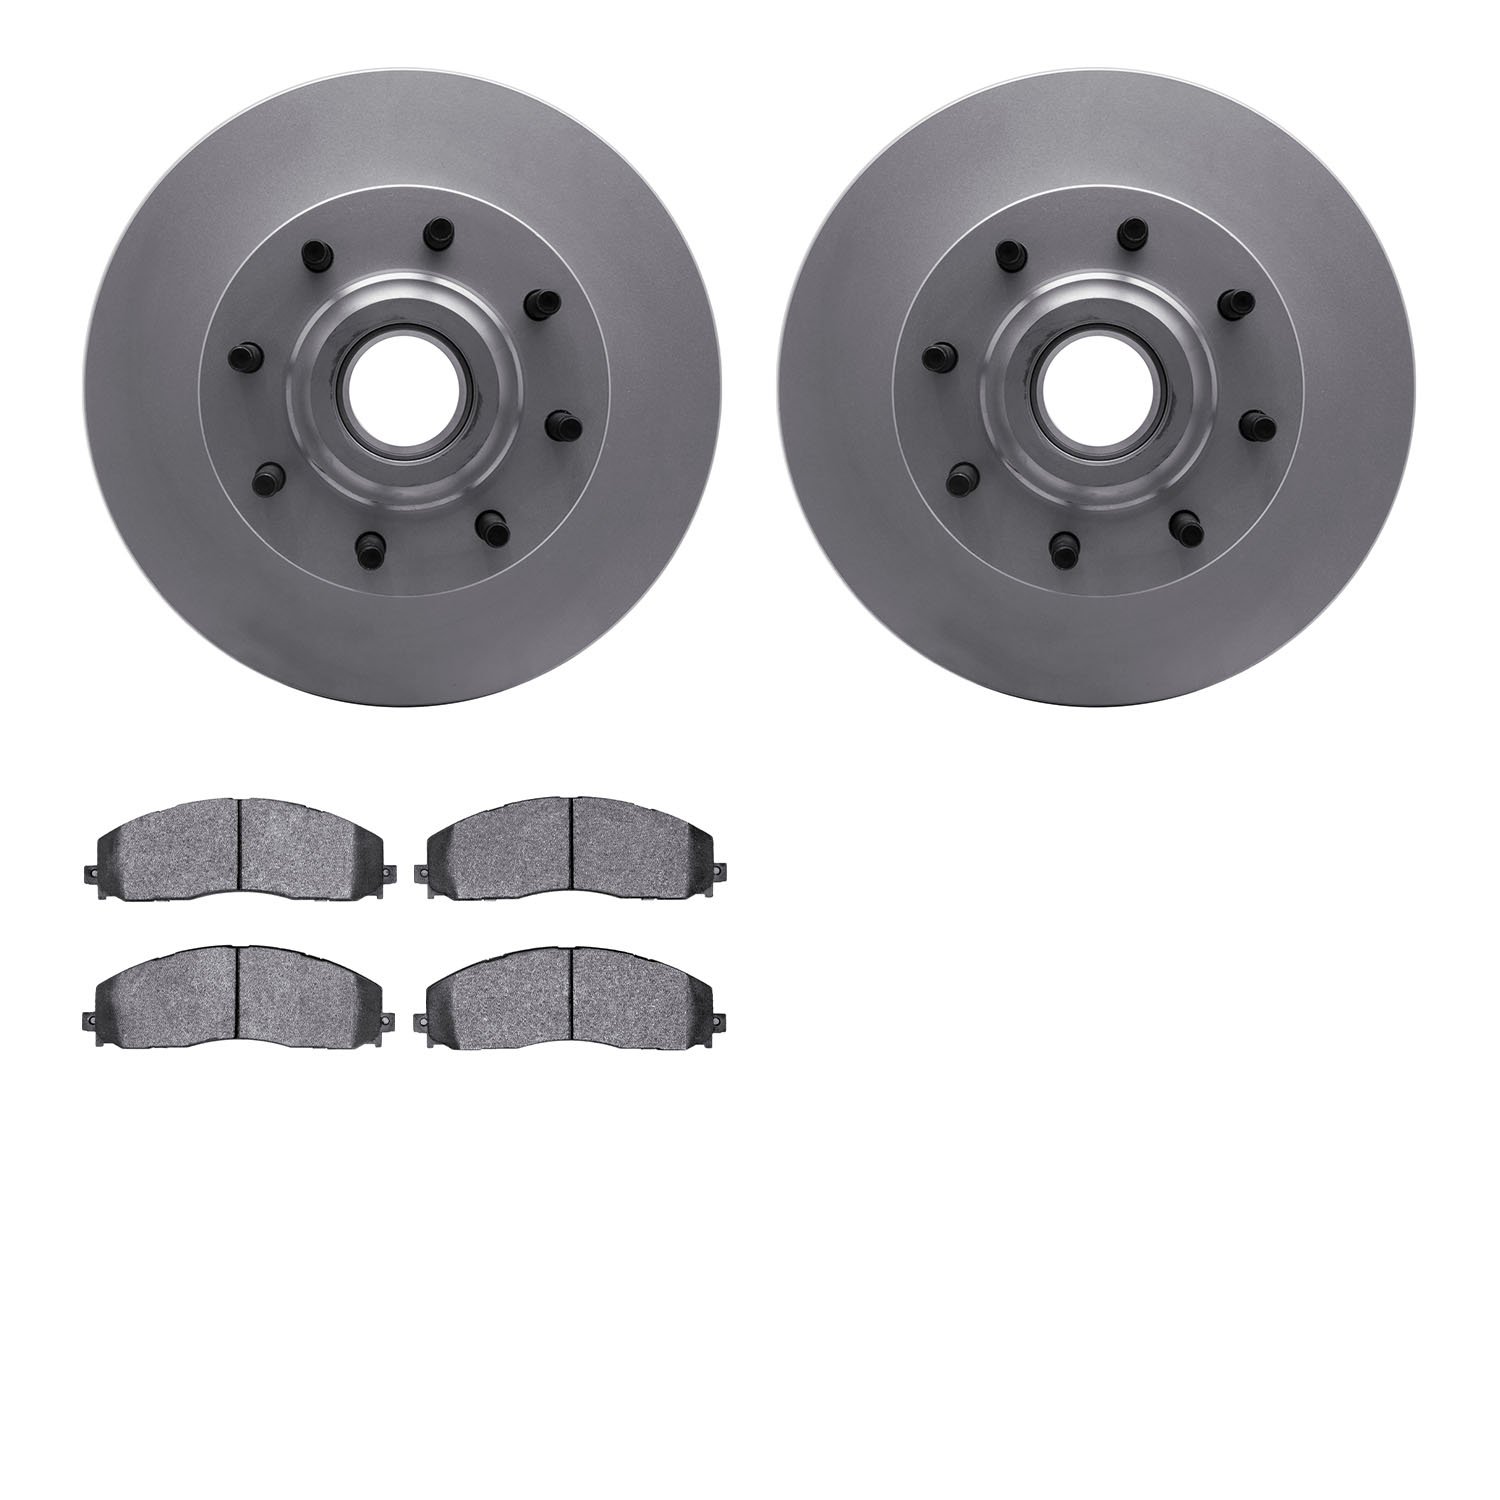 4502-99192 Geospec Brake Rotors w/5000 Advanced Brake Pads Kit, Fits Select Ford/Lincoln/Mercury/Mazda, Position: Front